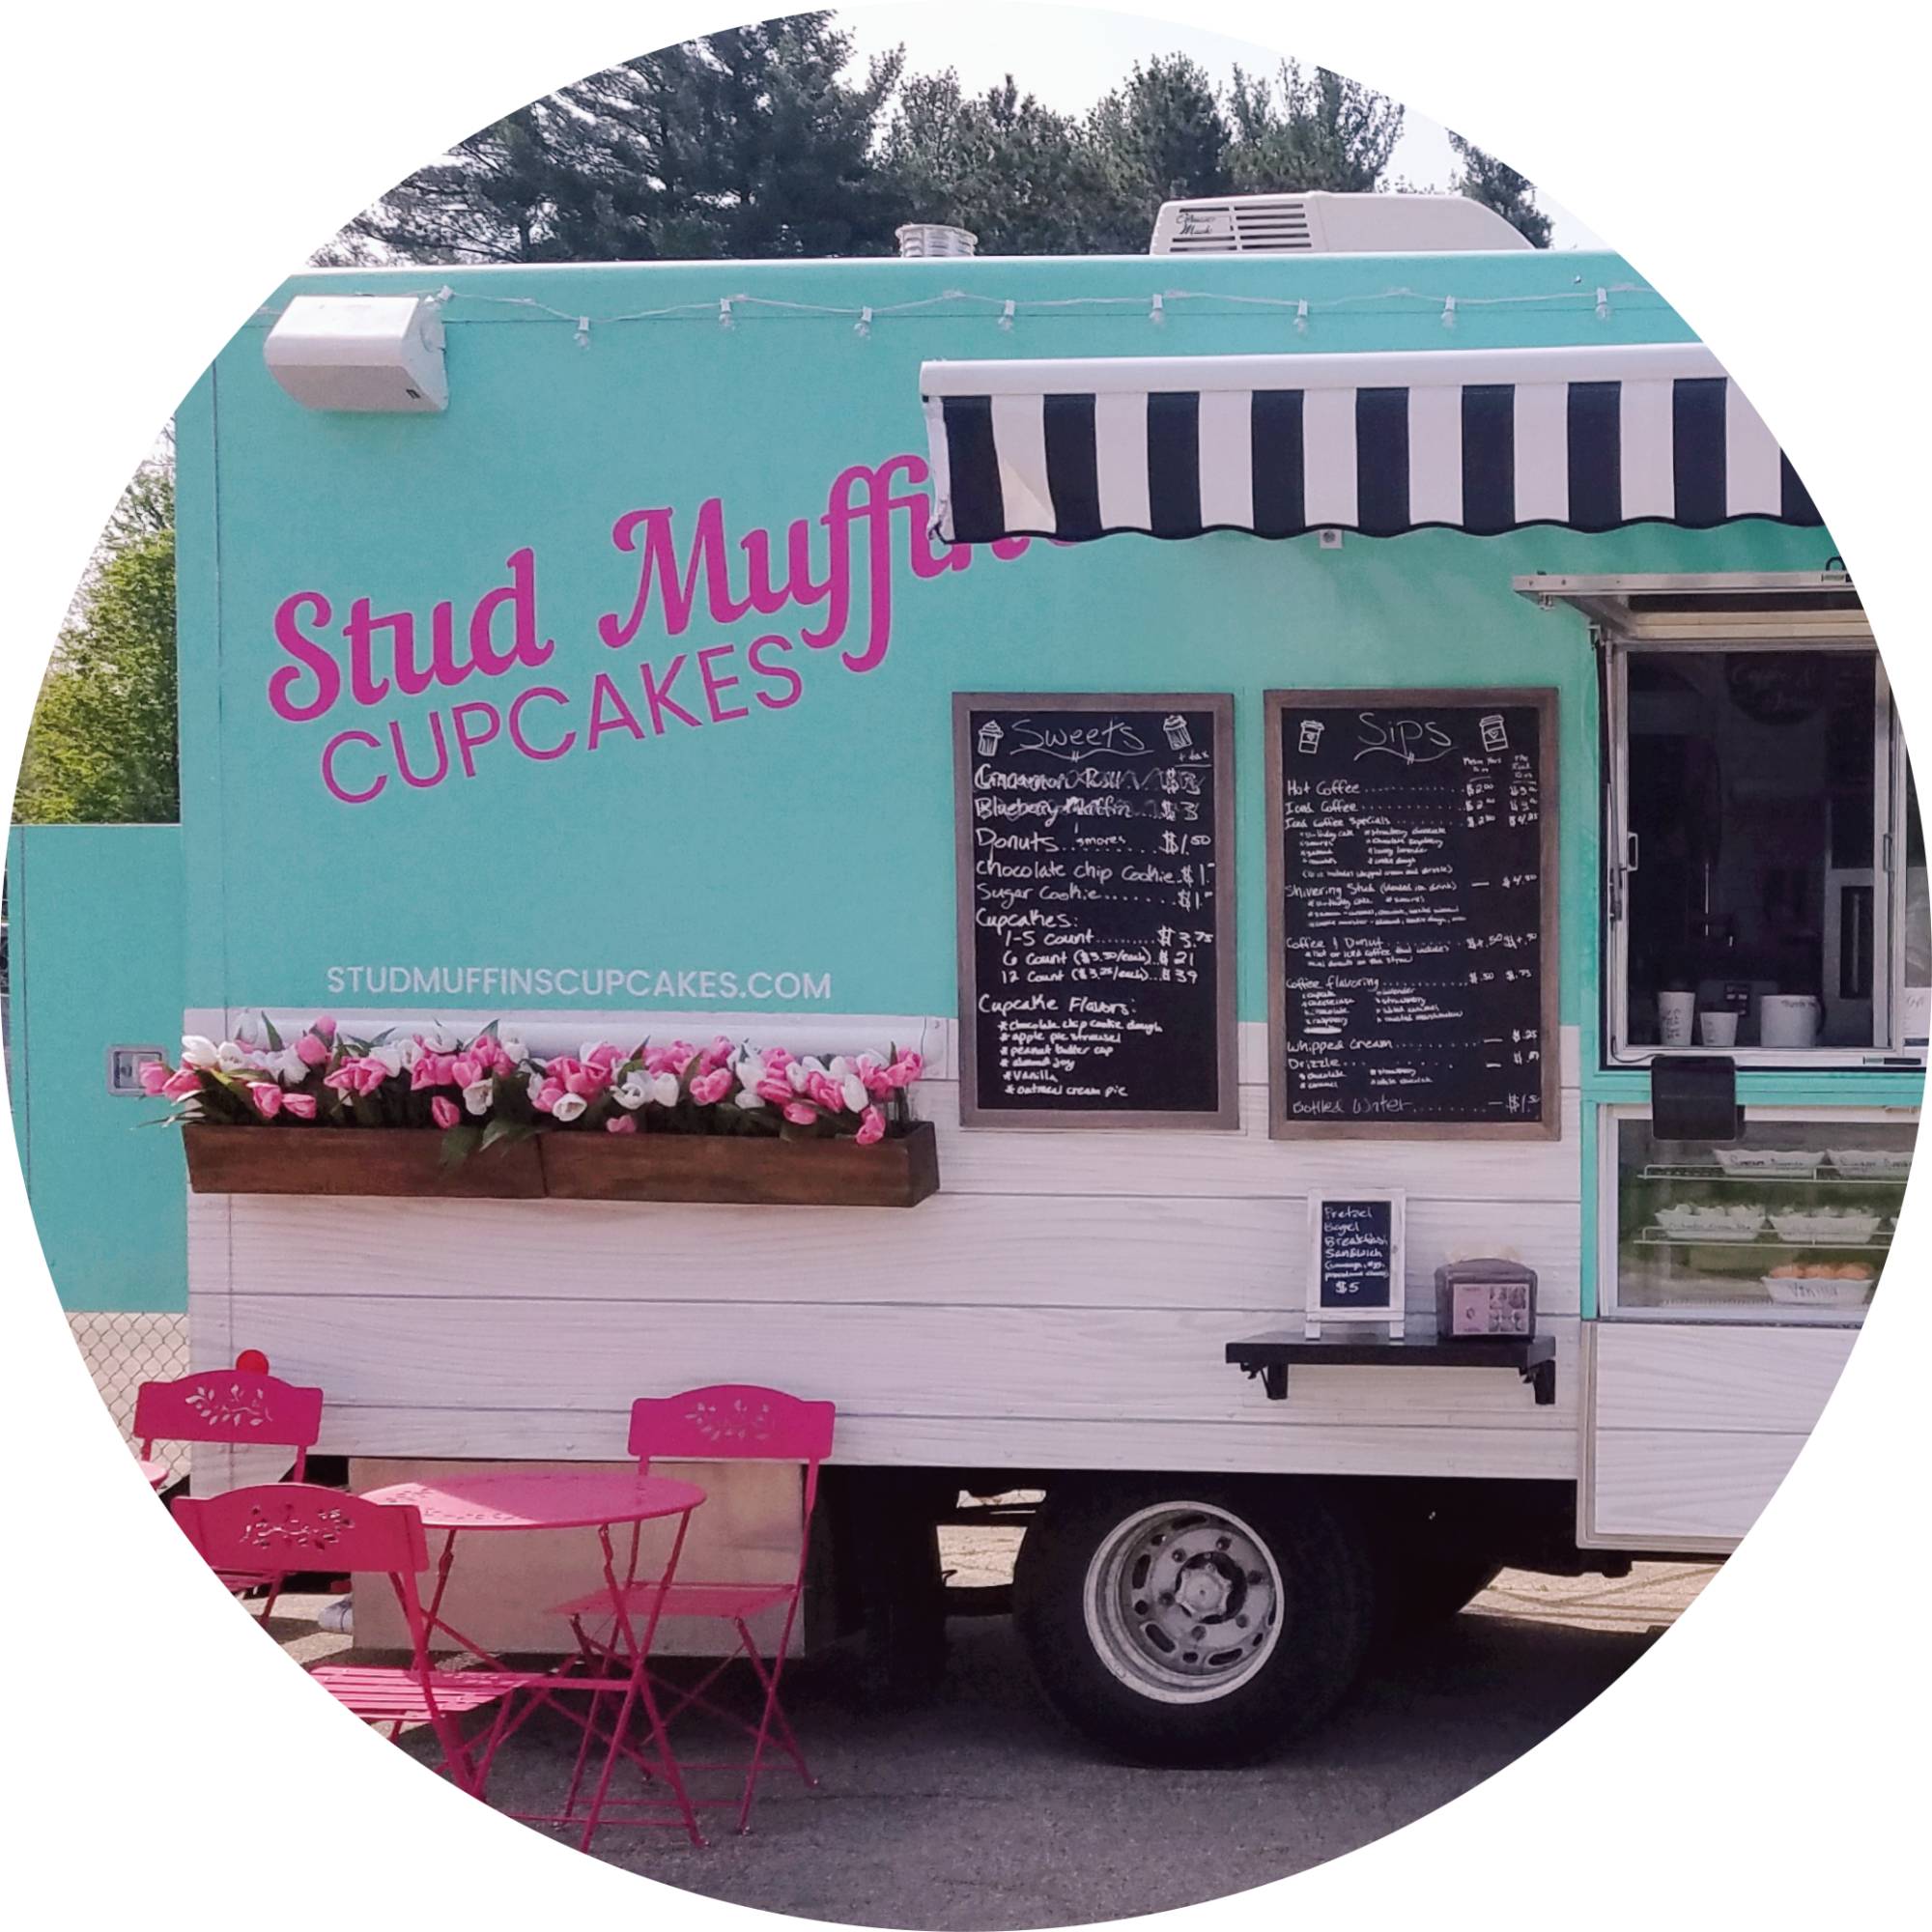 Stud Muffin's Cupcakes food truck with a small flower box on the side and two chalkboard menus